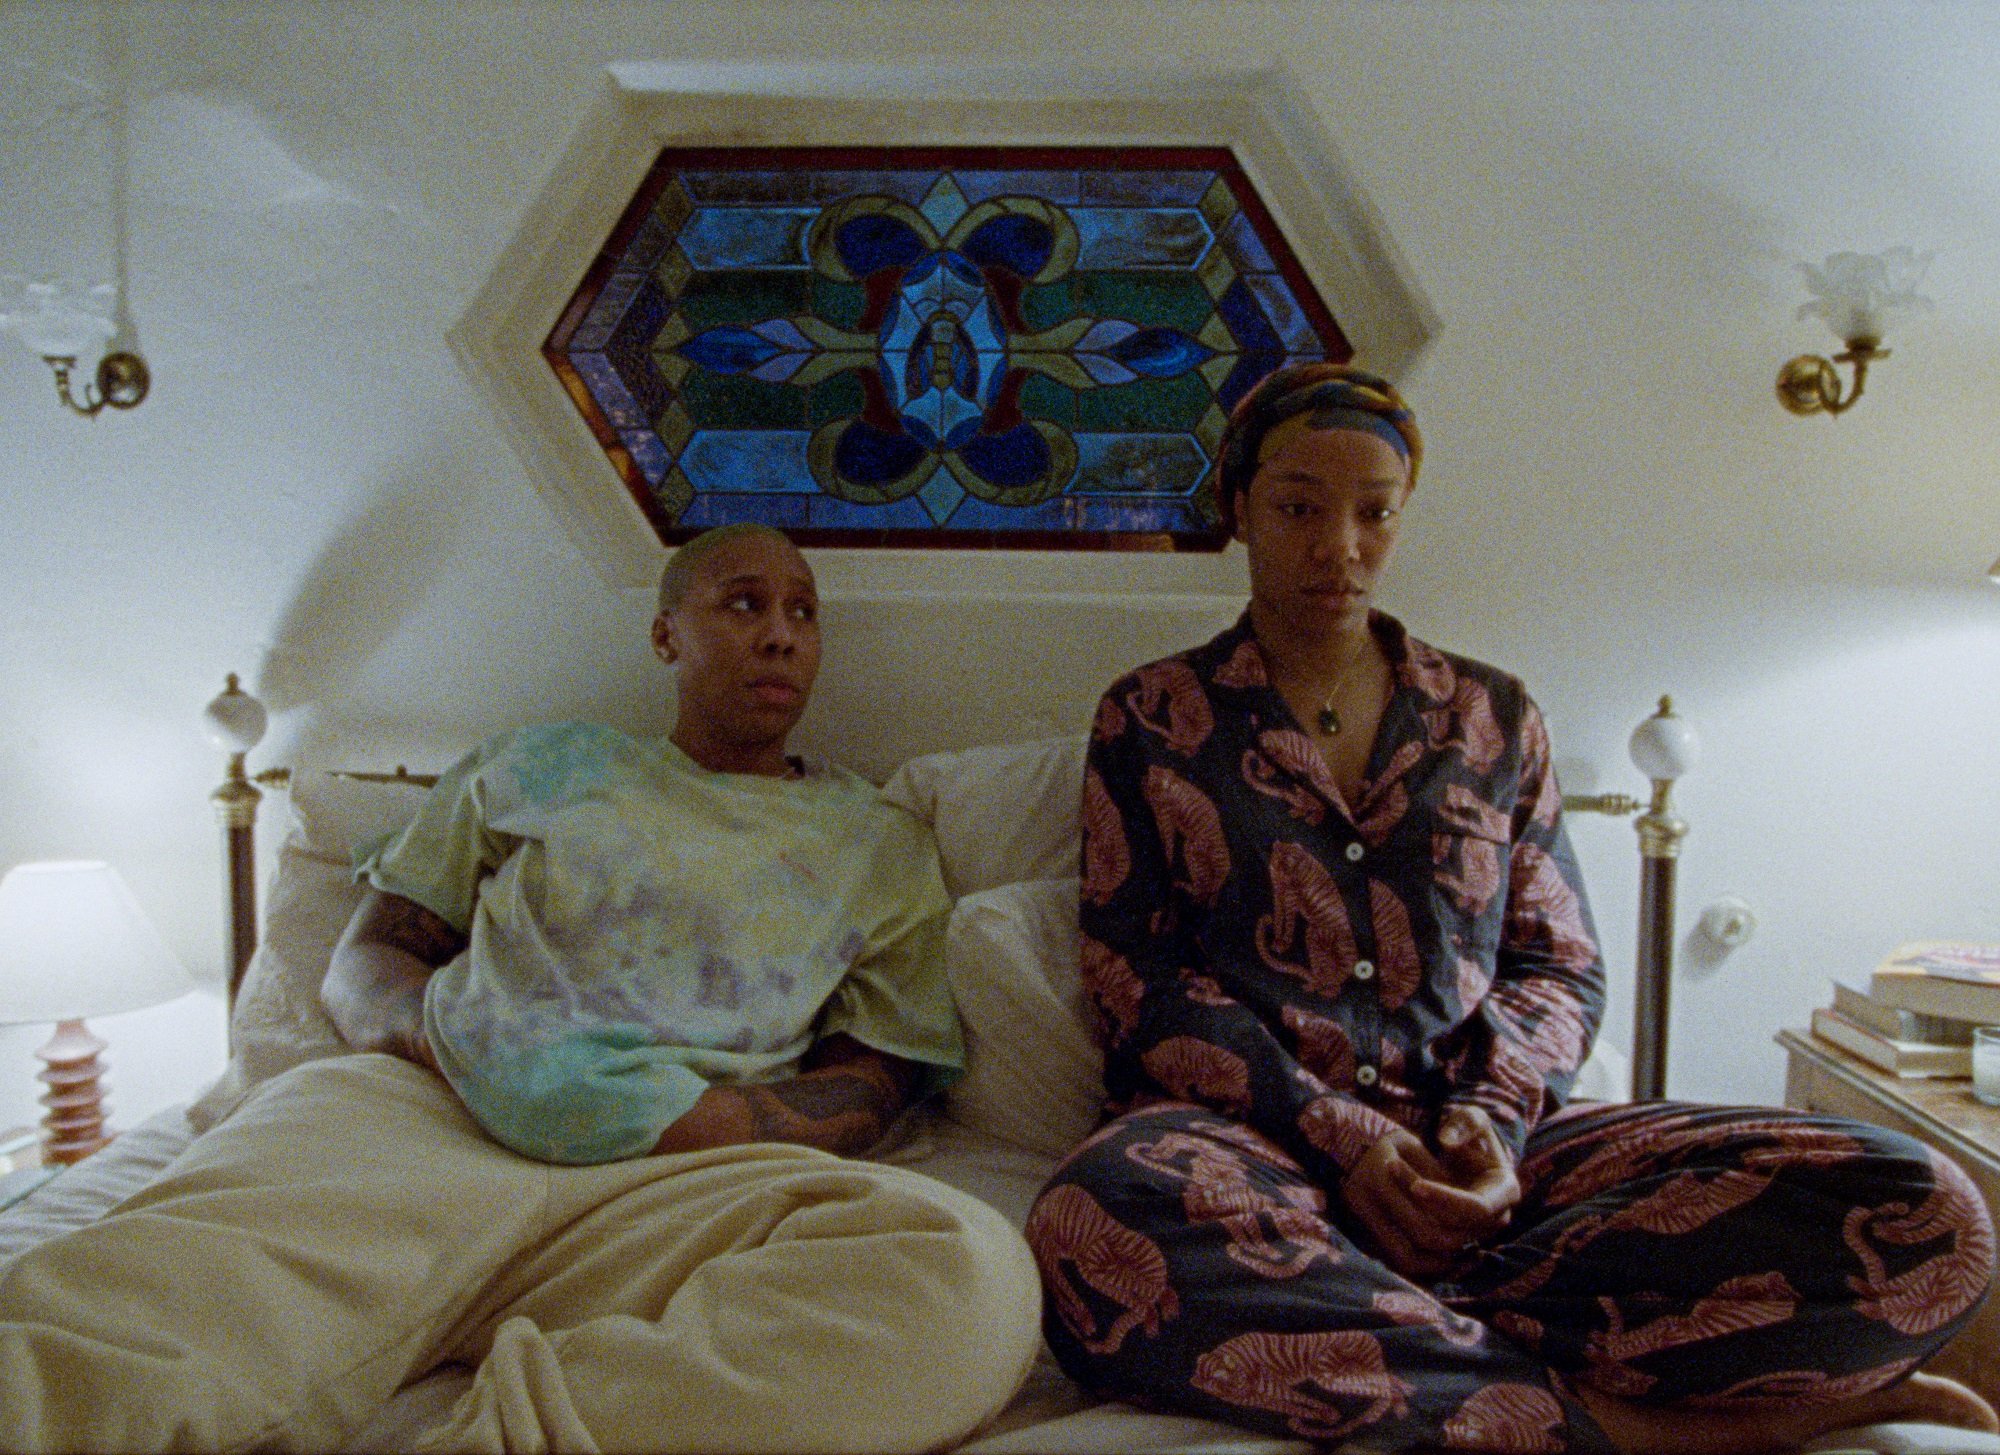 Master of None Season 3: Denise and Alicia in bed